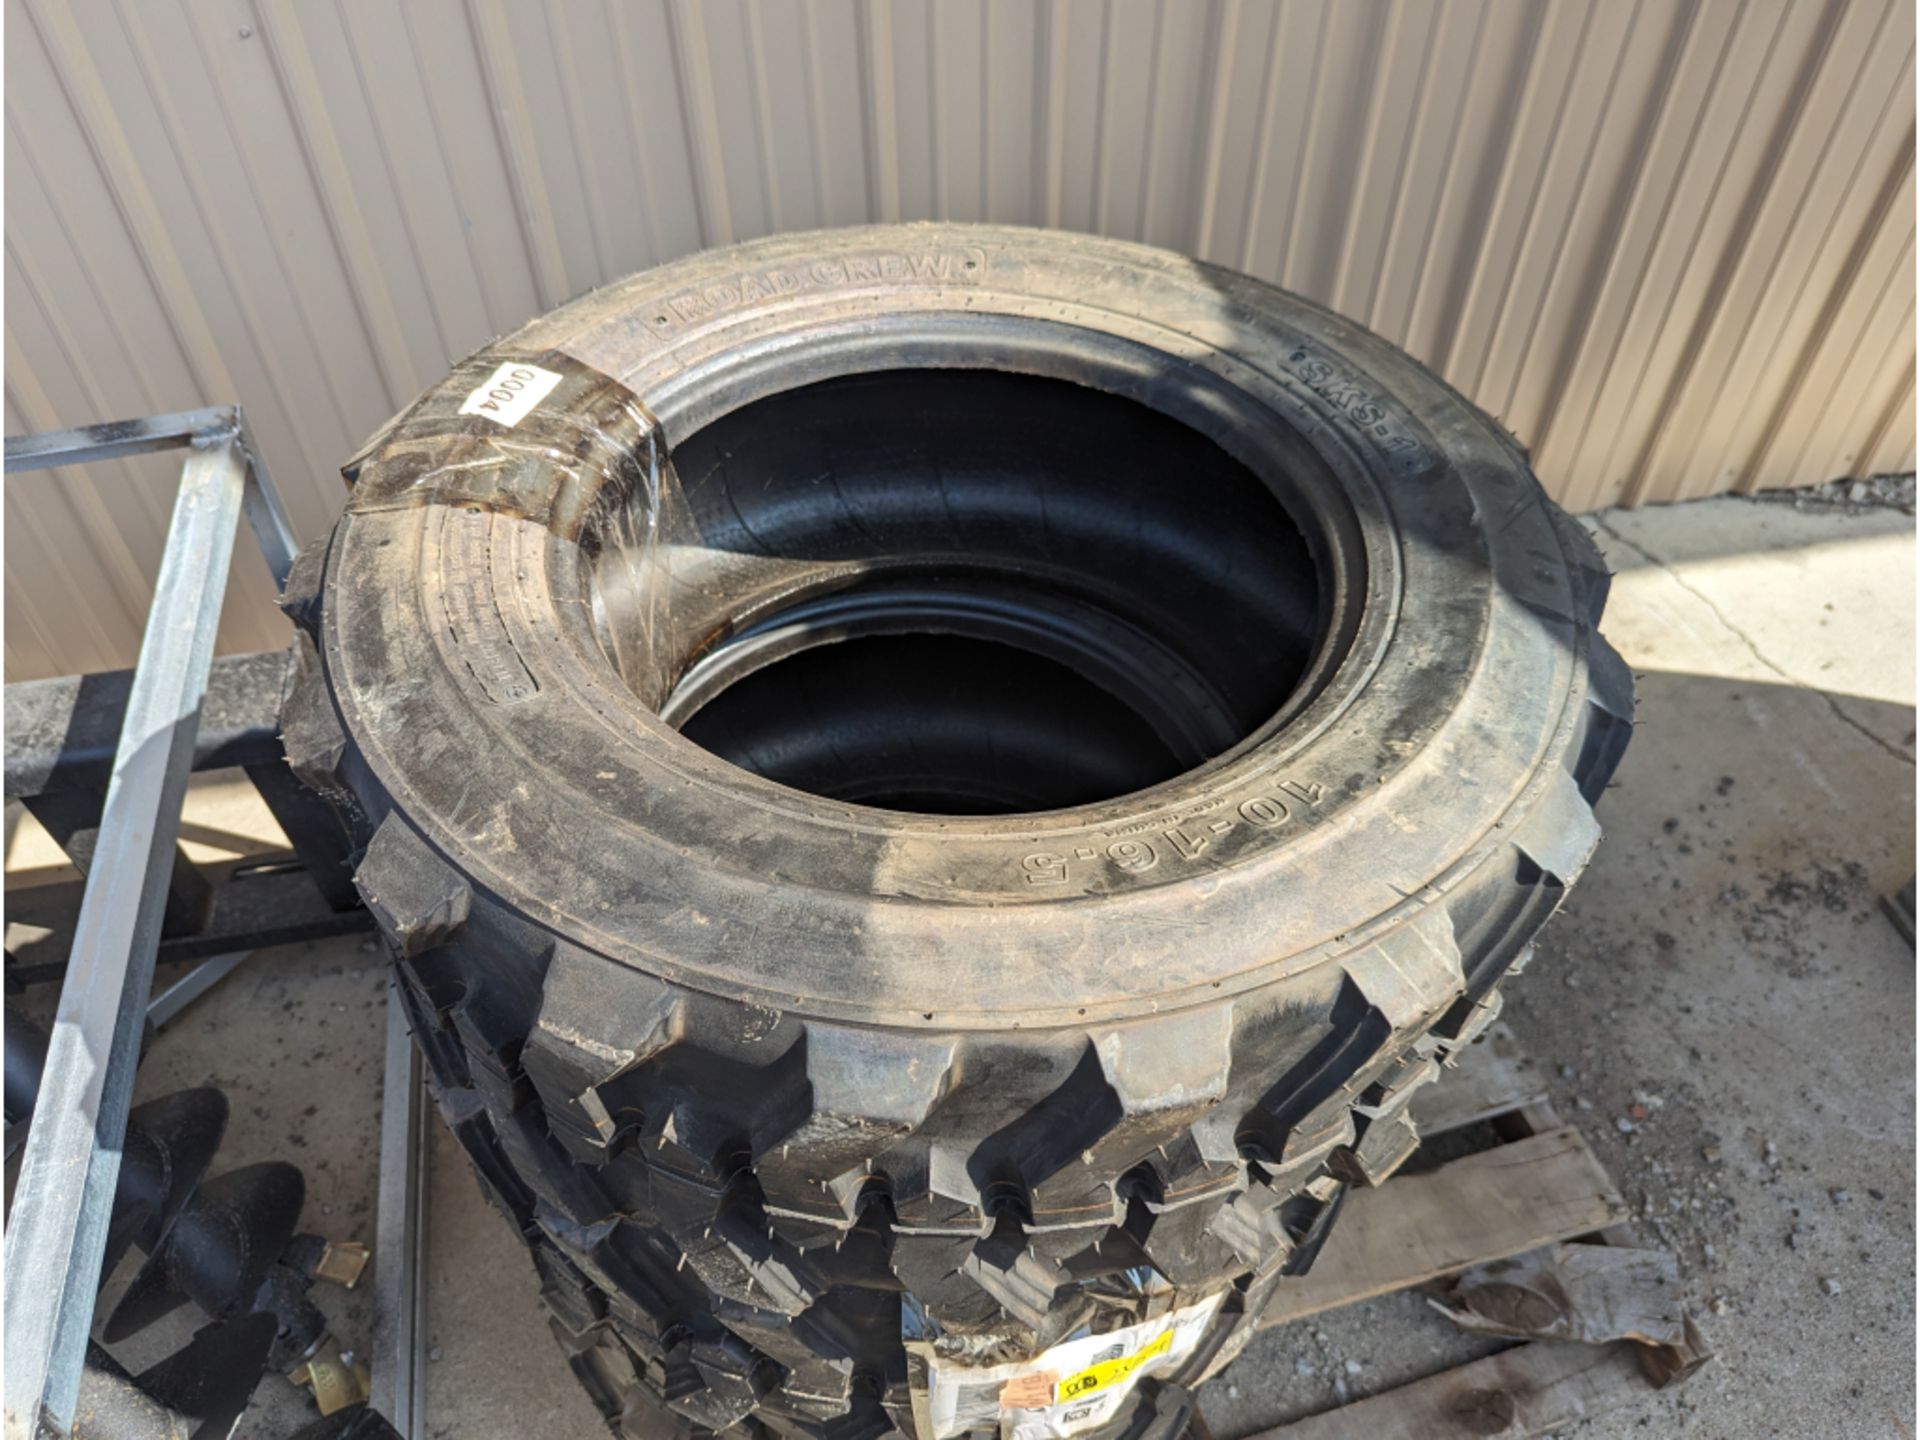 4 NEW Road Crew SKS-1 Skid Steer Tires, 1 Used Tire, 10-16.5 - Image 3 of 10